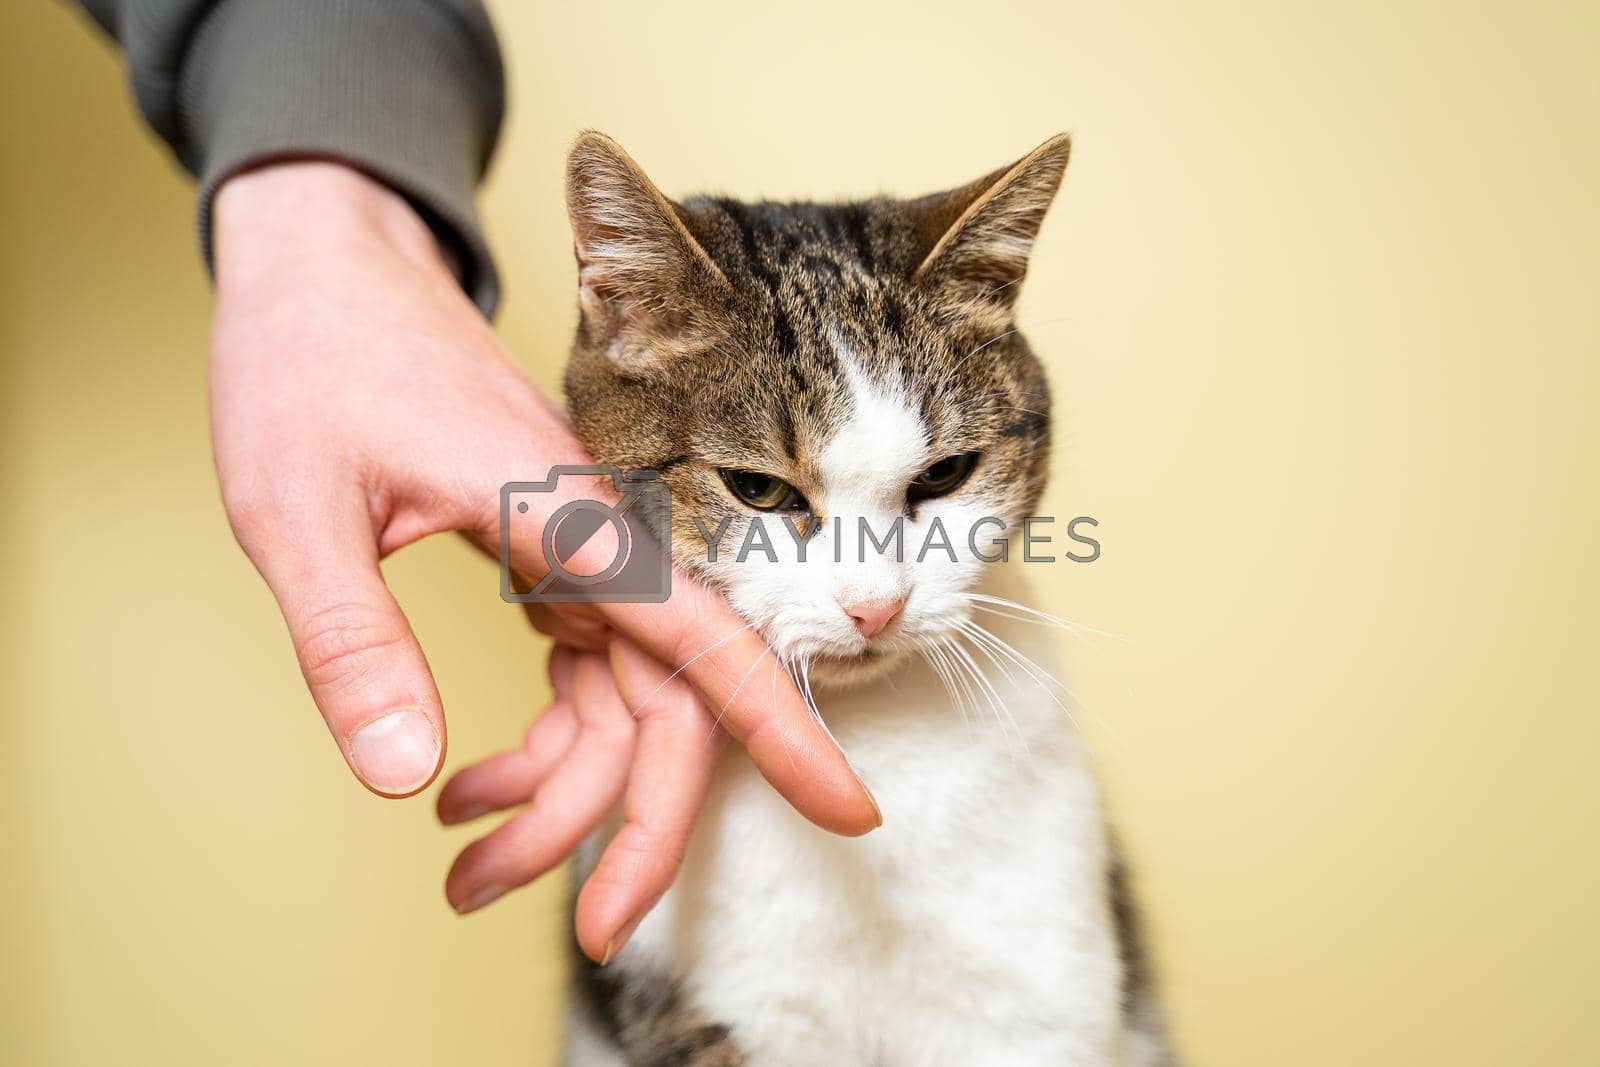 Shelter for animals concept. Caring for pets. Volunteer petting and caressing a stray cat in an animal shelter on a yellow background. Concept of volunteering. Volunteer organization for poor animals.